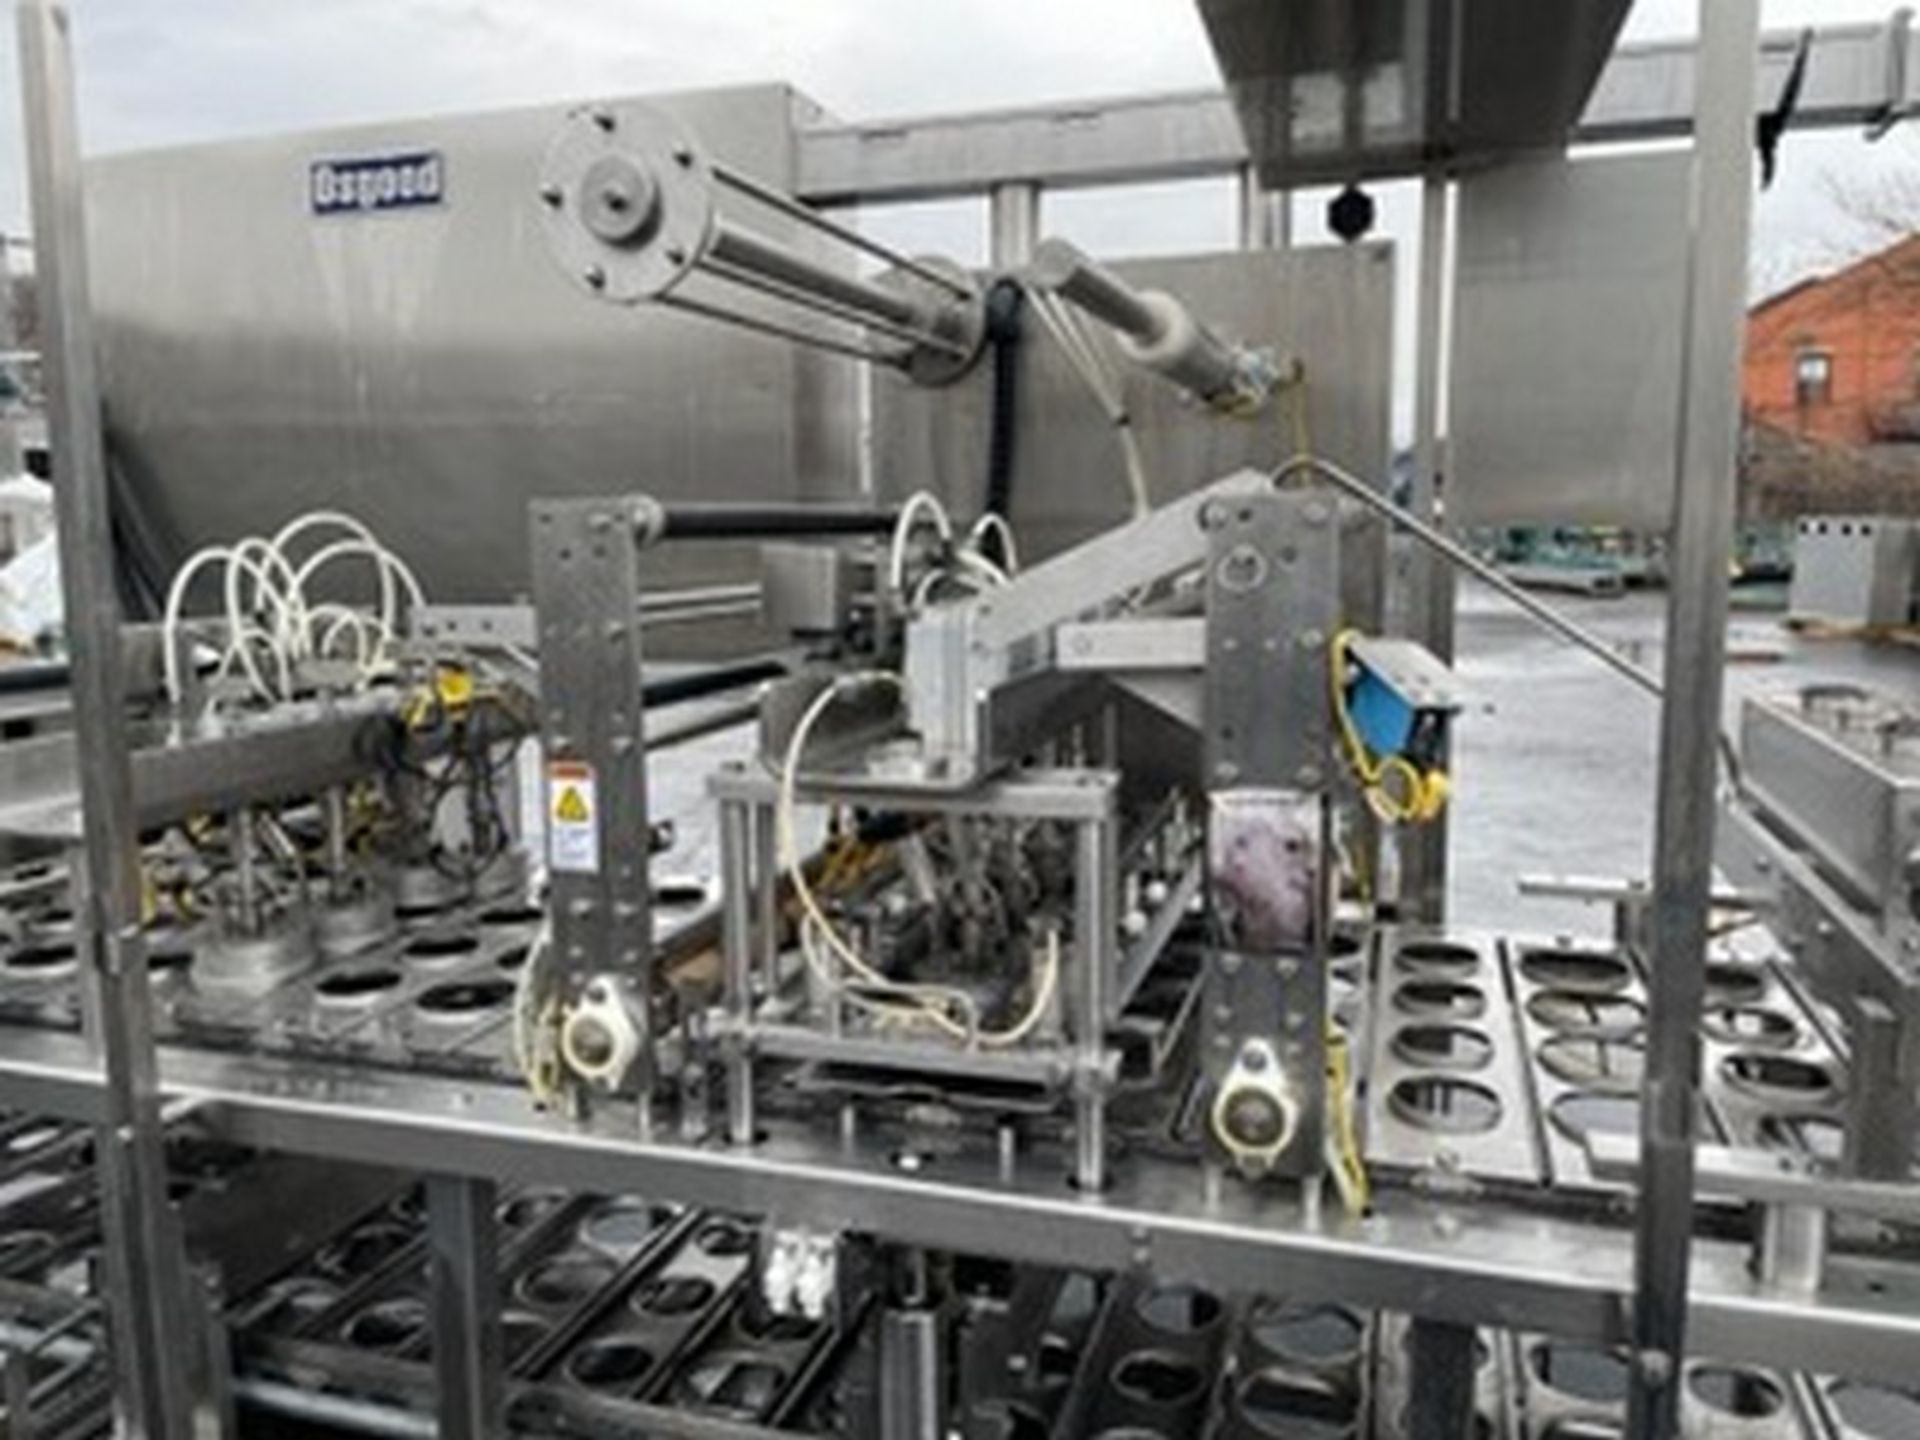 Osgood 4-Lane In-Line S/S Cup Filler,M/N 4800-E, S/N 351-840, Set Up with 3-5/8" W On-Board Change - Image 4 of 18